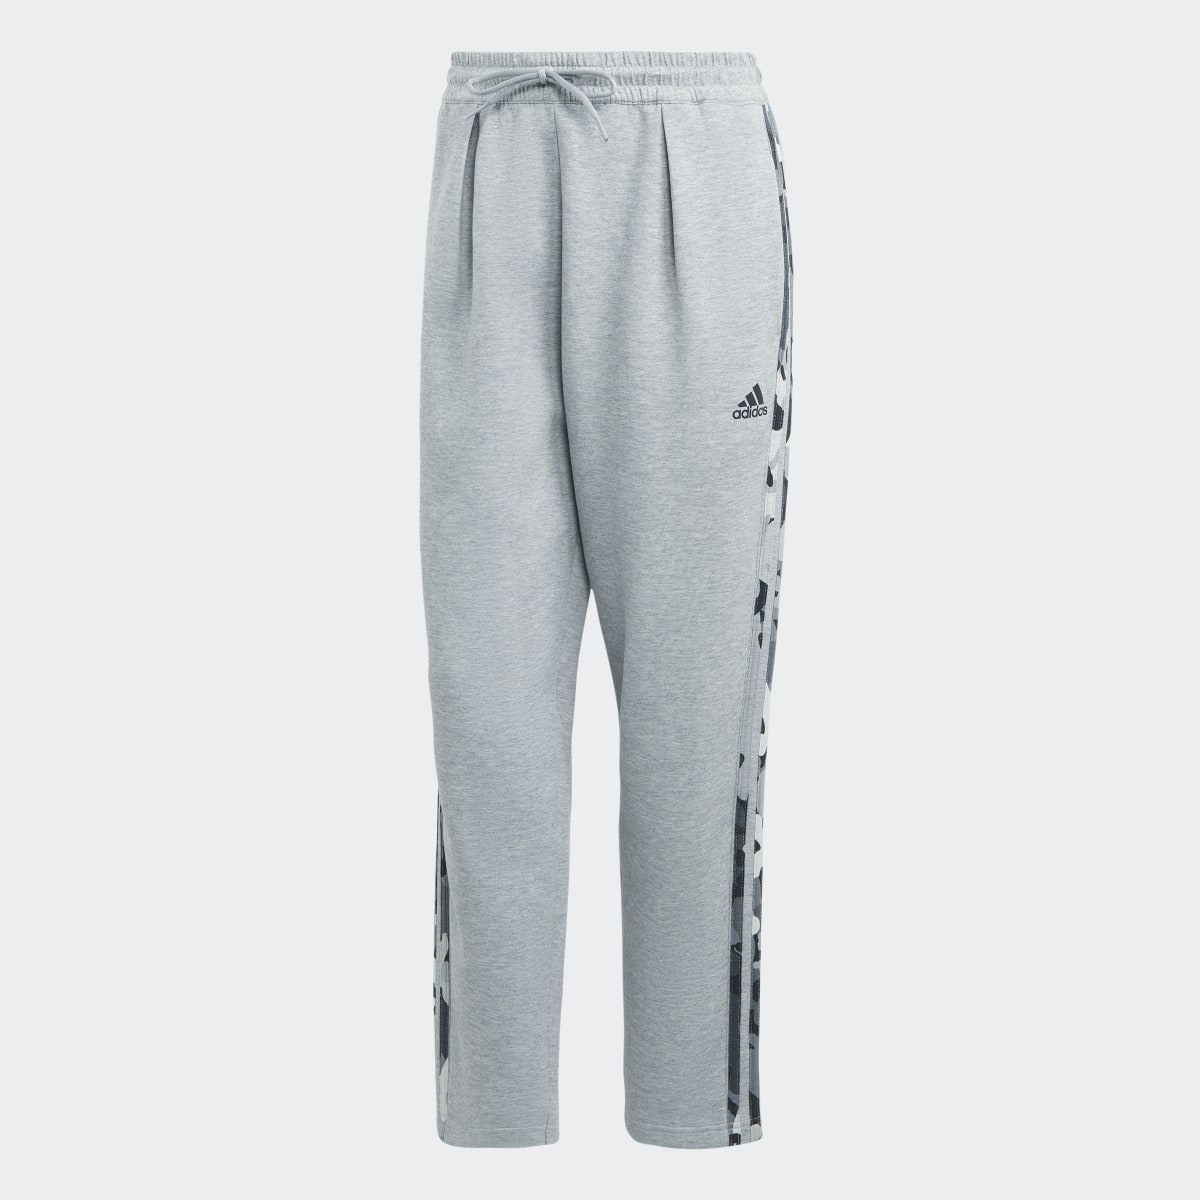 Adidas Graphic Tracksuit Bottoms. 4